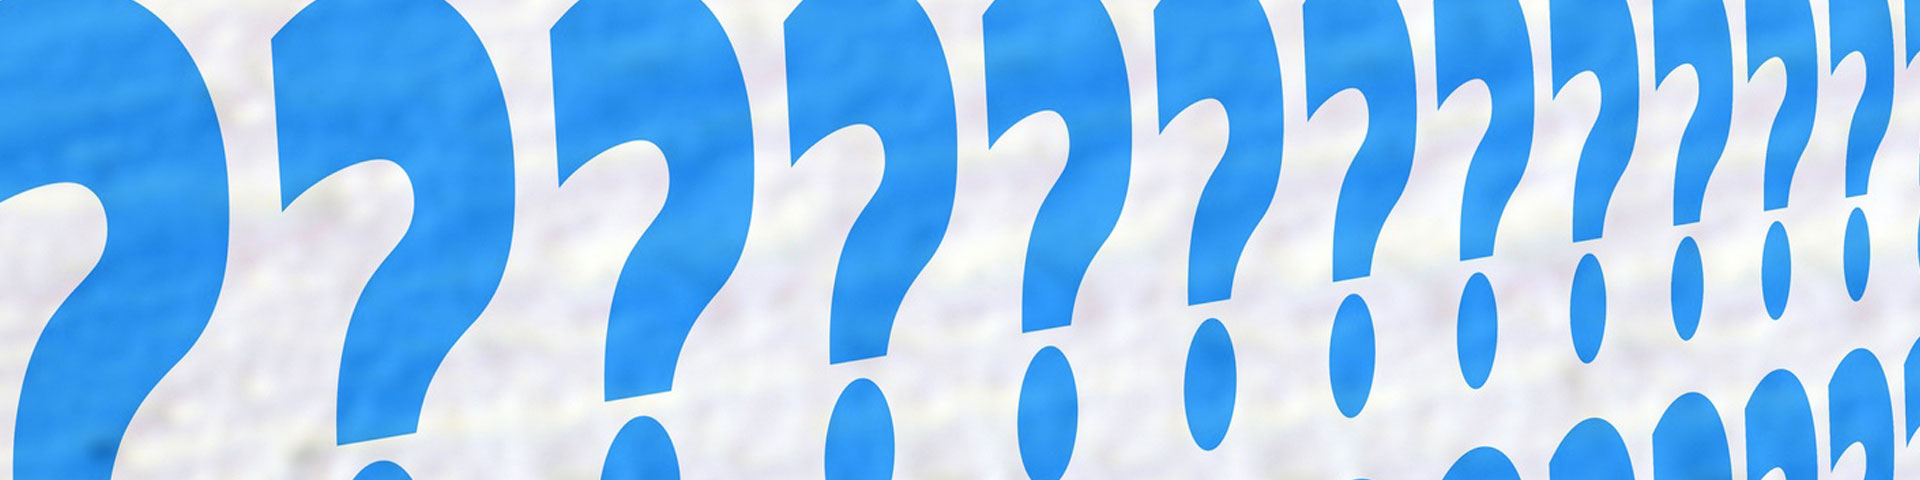 12 large blue question marks running from left to right on a white background.